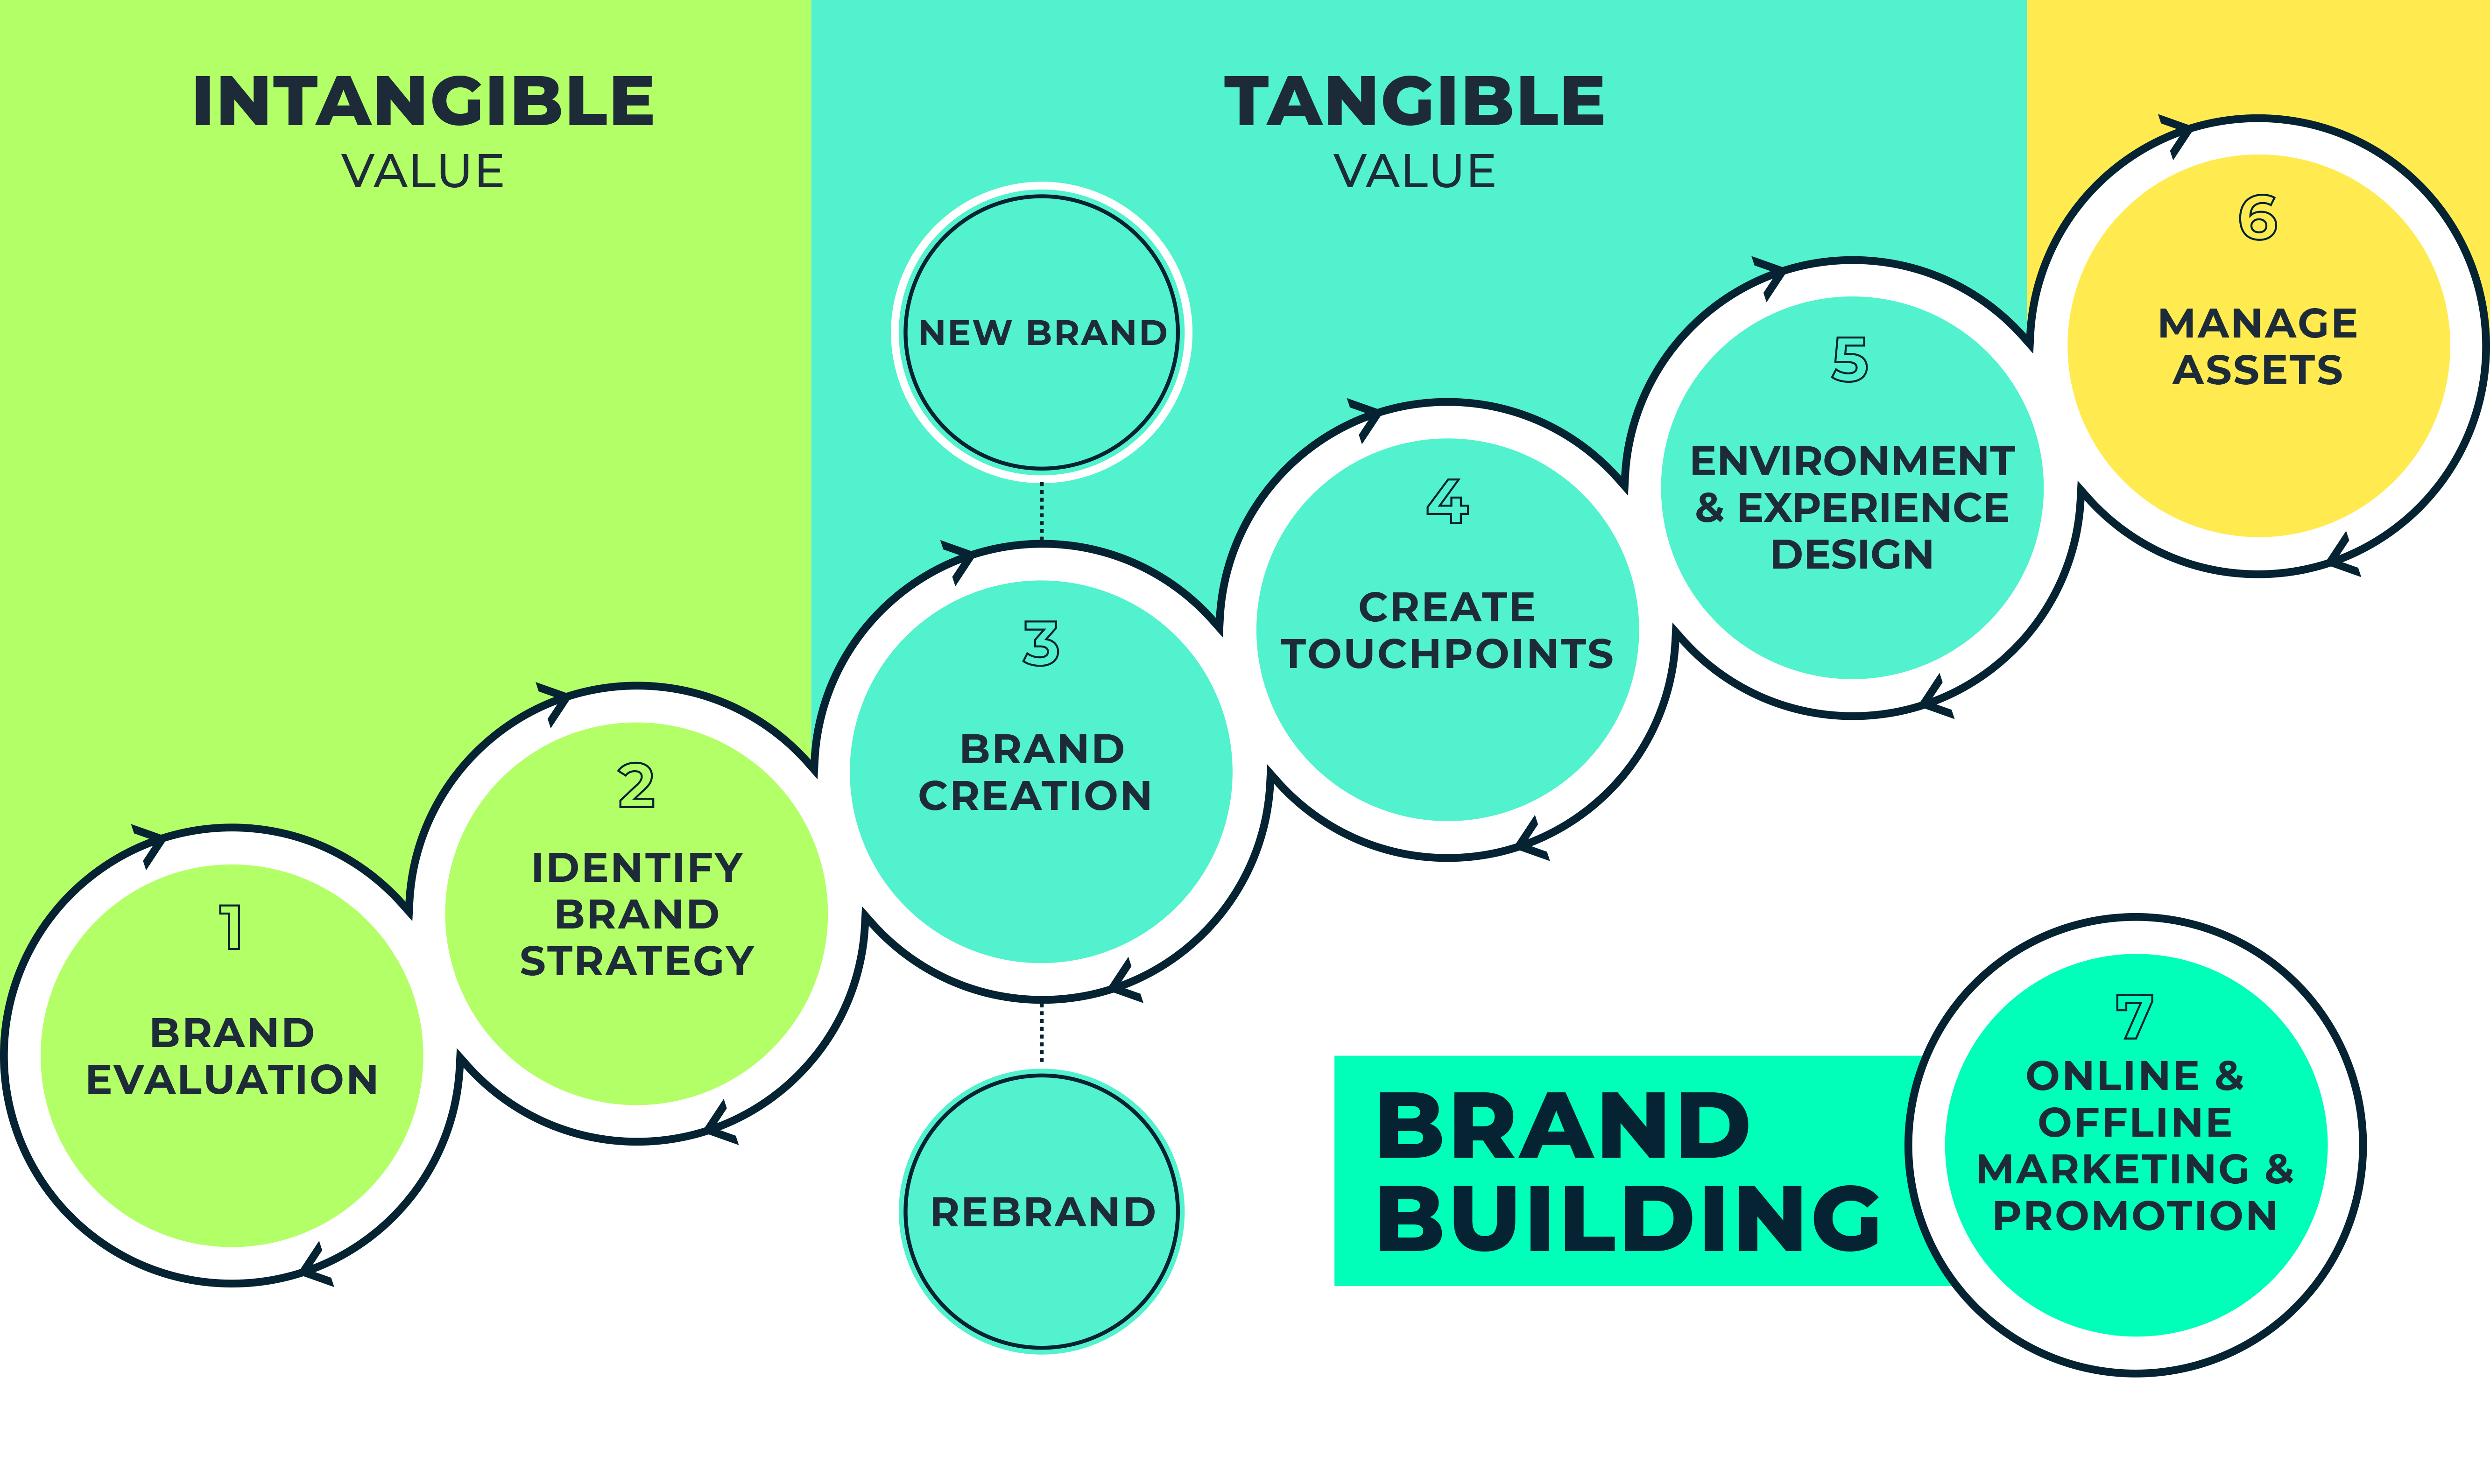 HOW WE DEVELOP A BRAND?